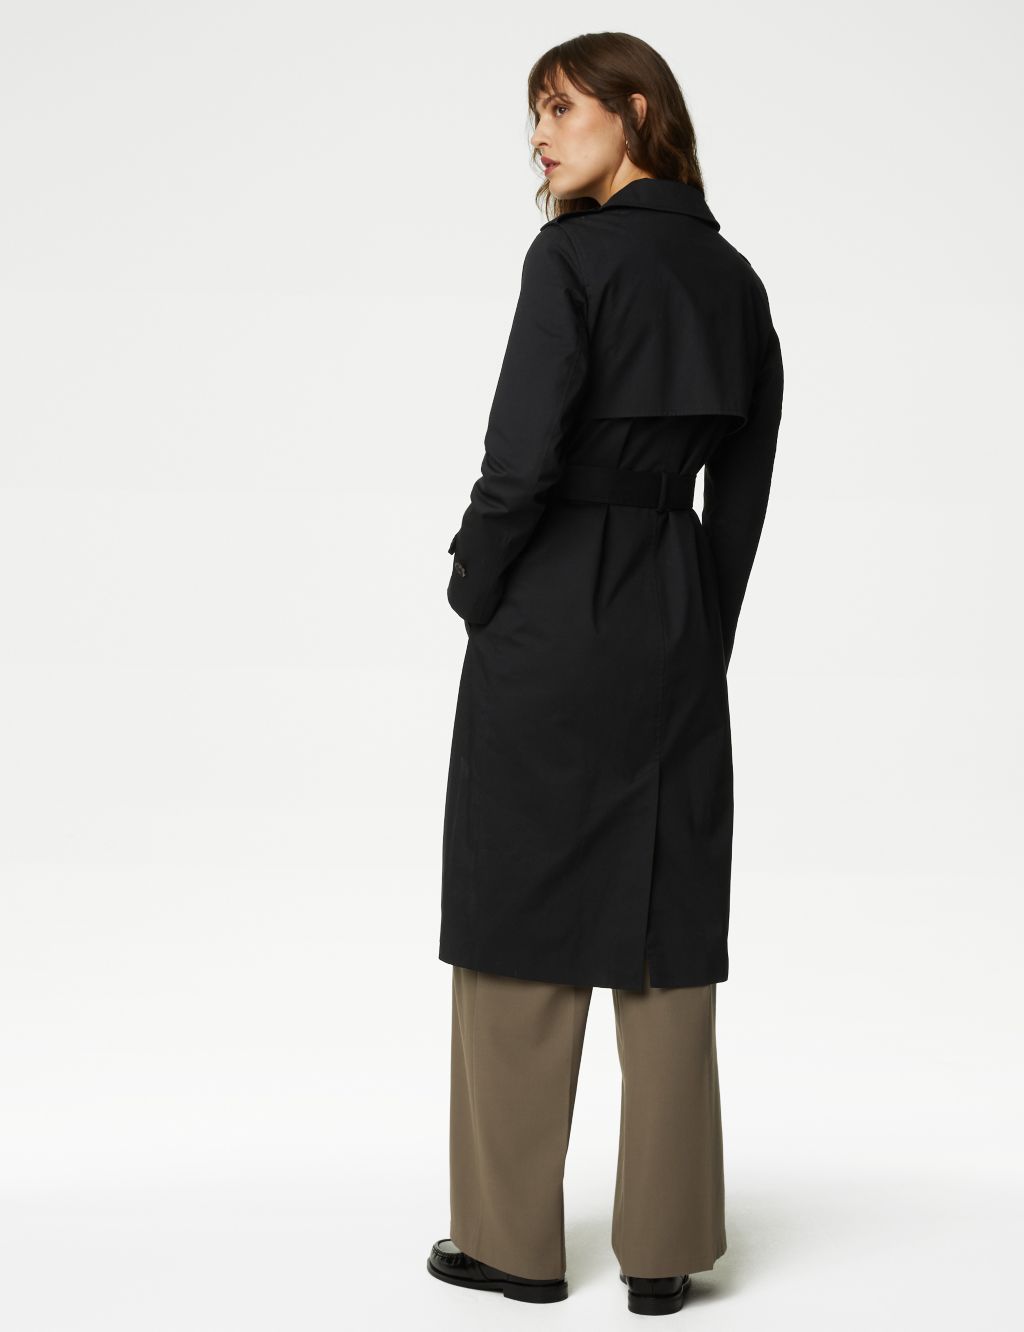 Cotton Rich Belted Longline Trench Coat image 5